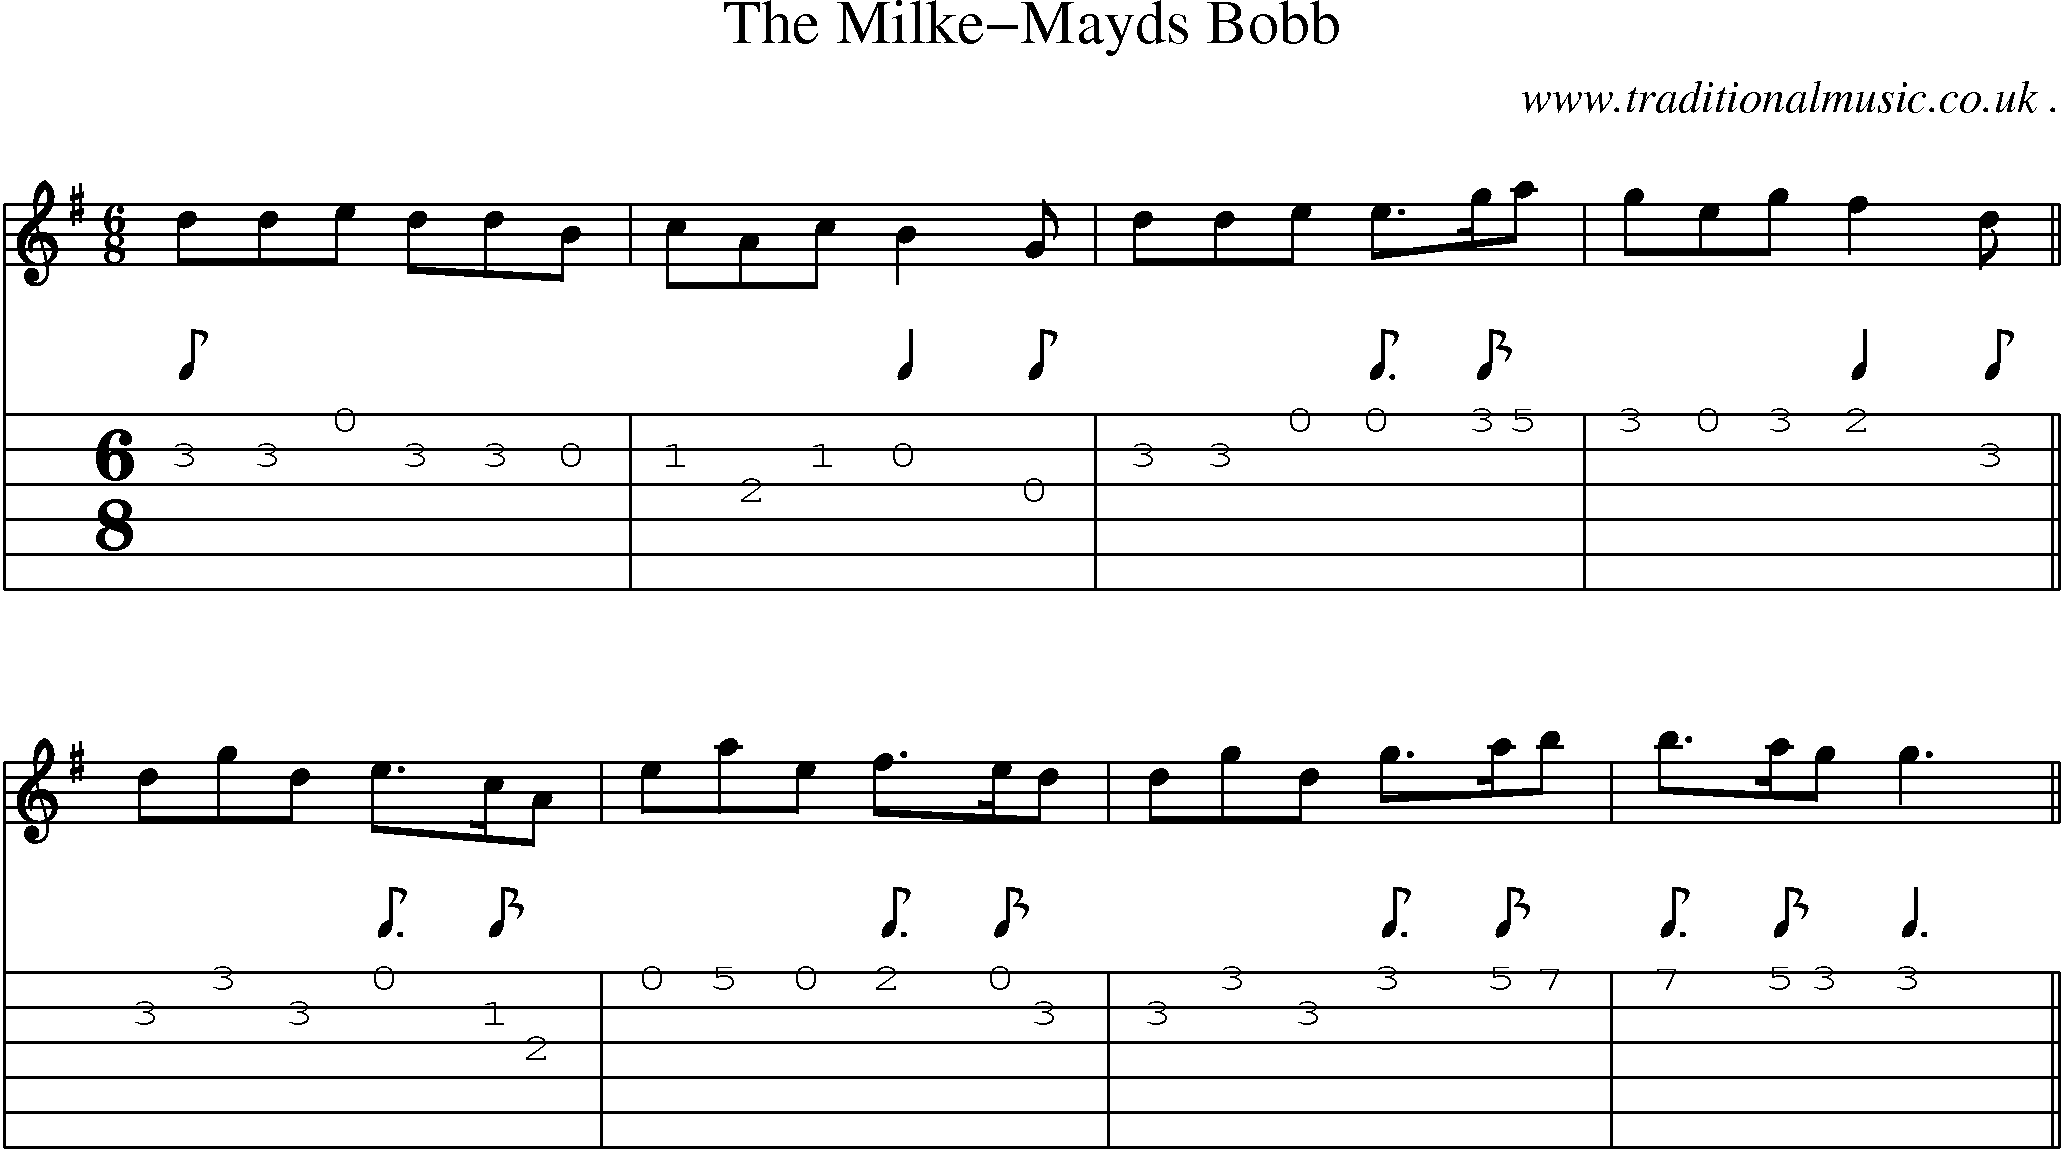 Sheet-Music and Guitar Tabs for The Milke-mayds Bobb